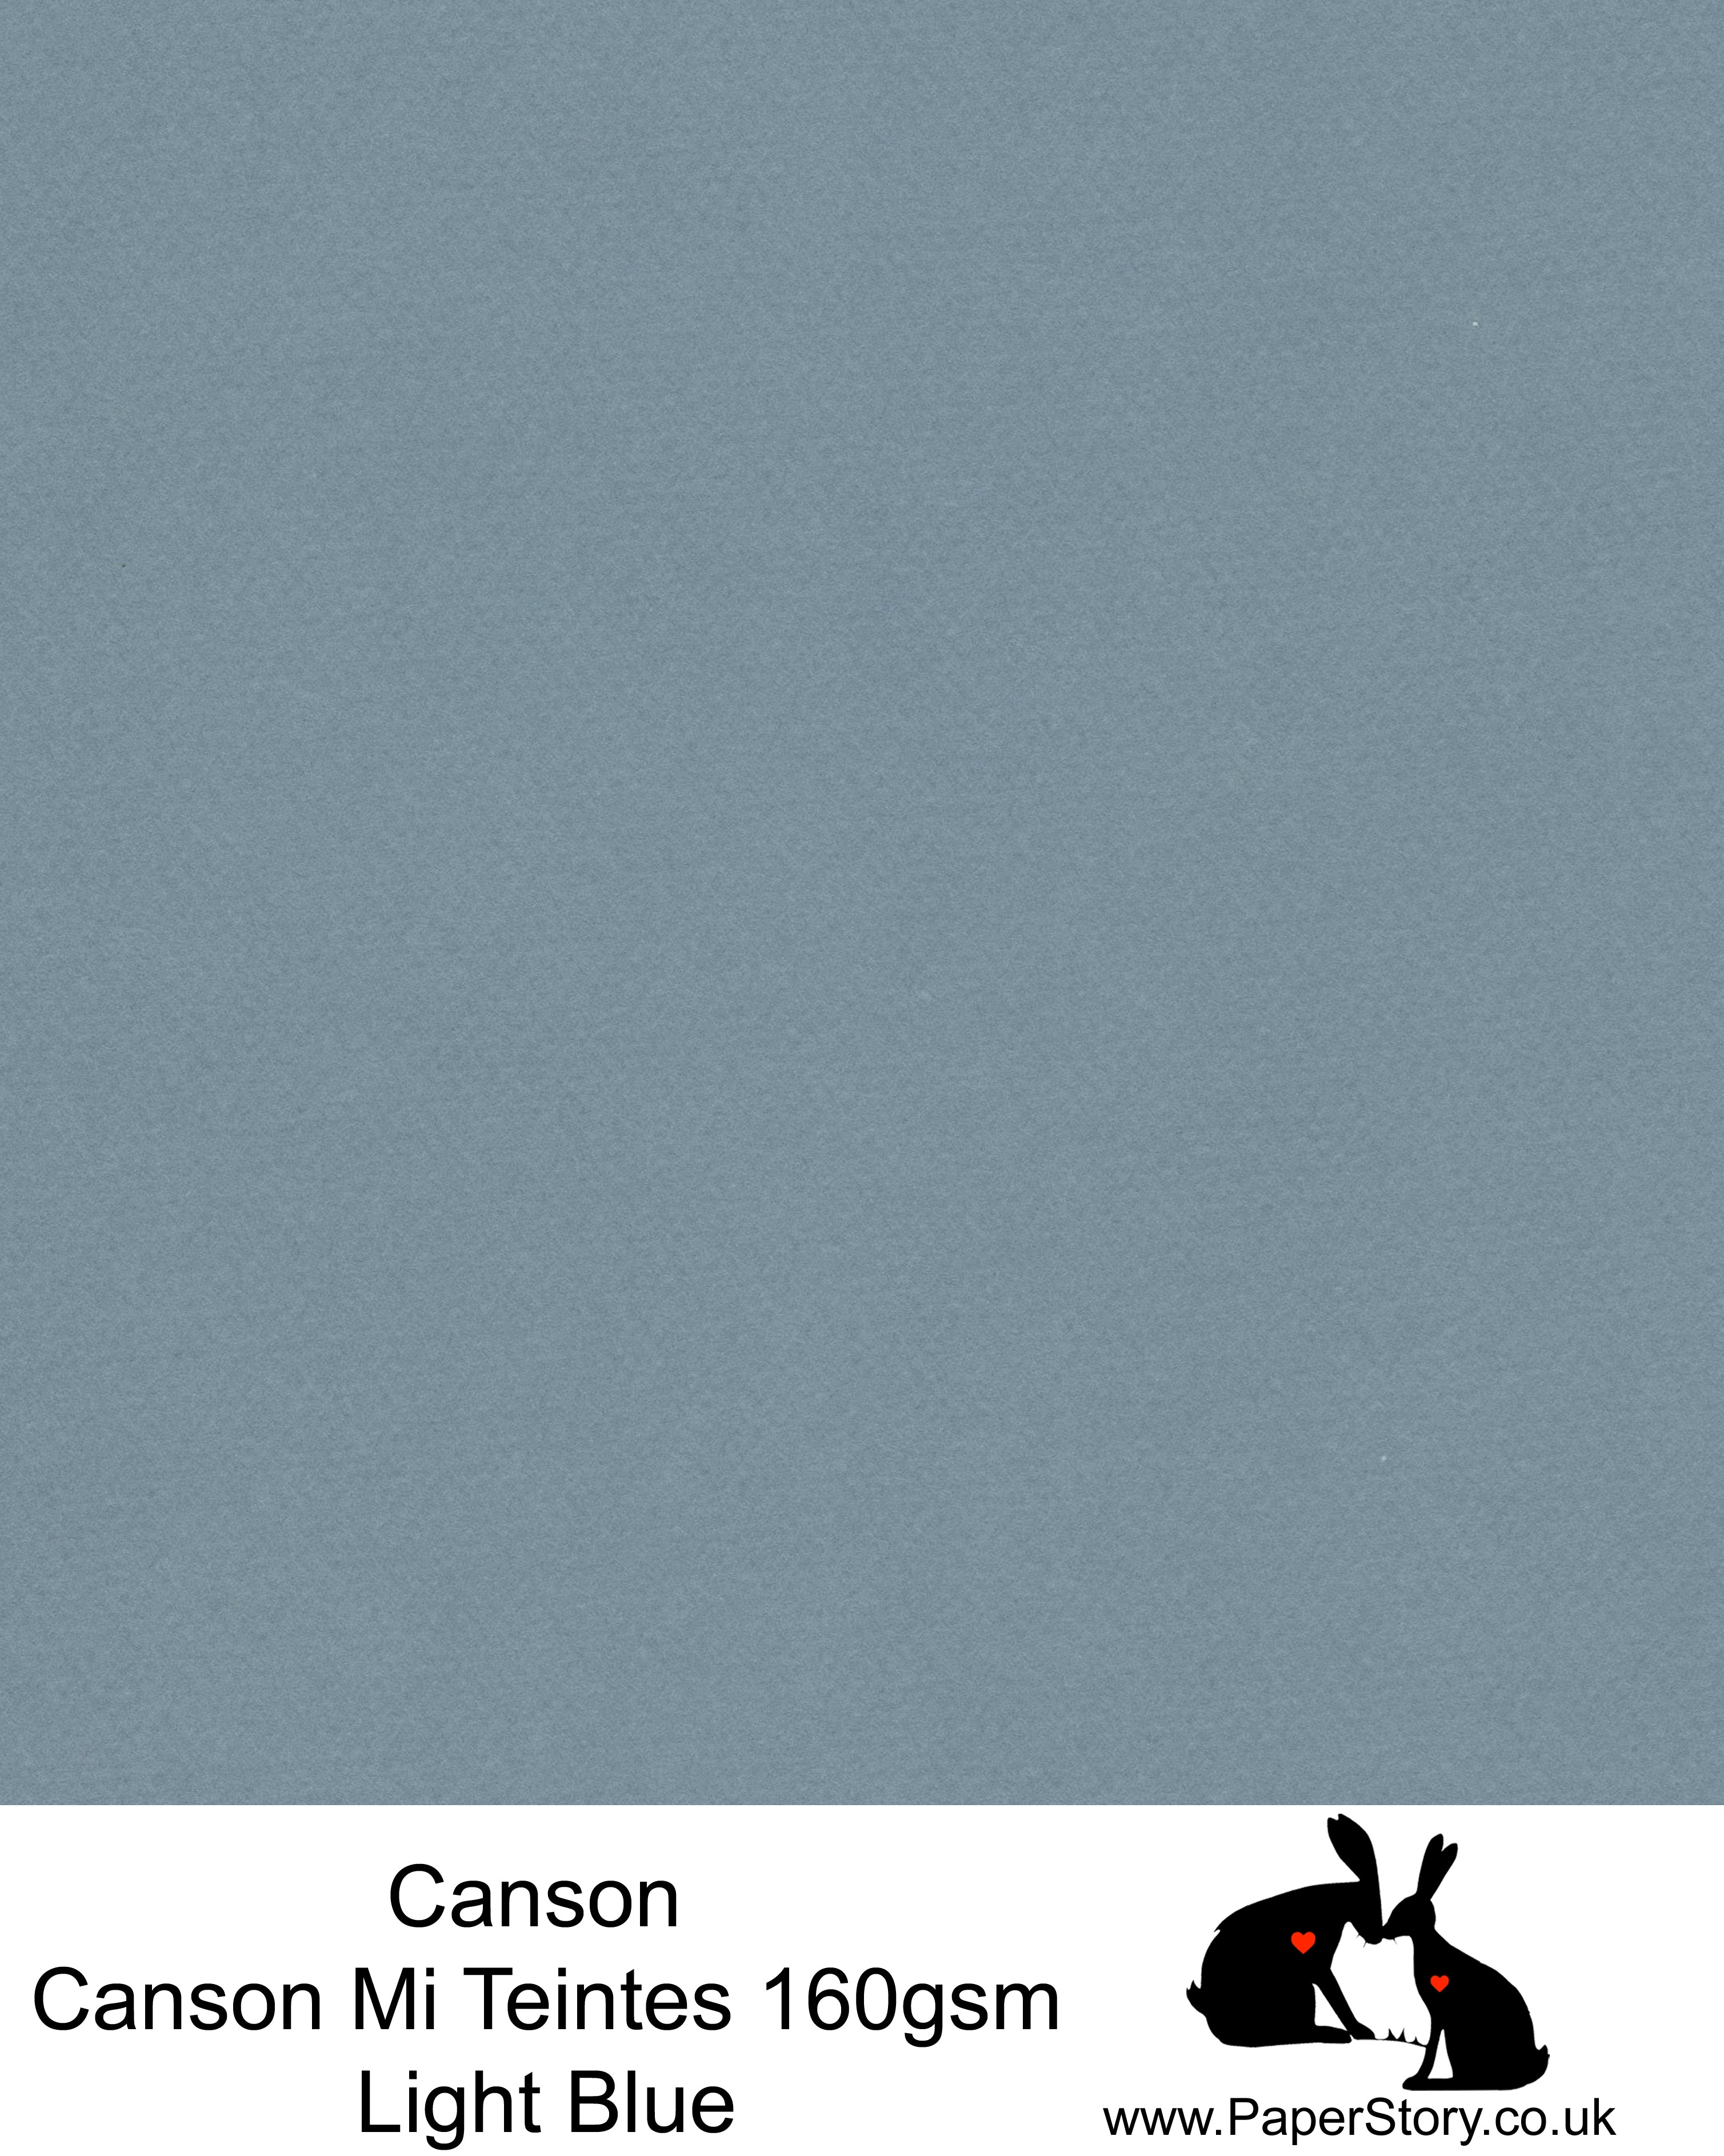 Canson Mi Teintes acid free, Champagne, light blue hammered texture honeycomb surface paper 160 gsm. This is a popular and classic paper for all artists especially well respected for Pastel  and Papercutting made famous by Paper Panda. This paper has a honeycombed finish one side and fine grain the other. An authentic art paper, acid free with a  very high 50% cotton content. Canson Mi-Teintes complies with the ISO 9706 standard on permanence, a guarantee of excellent conservation 